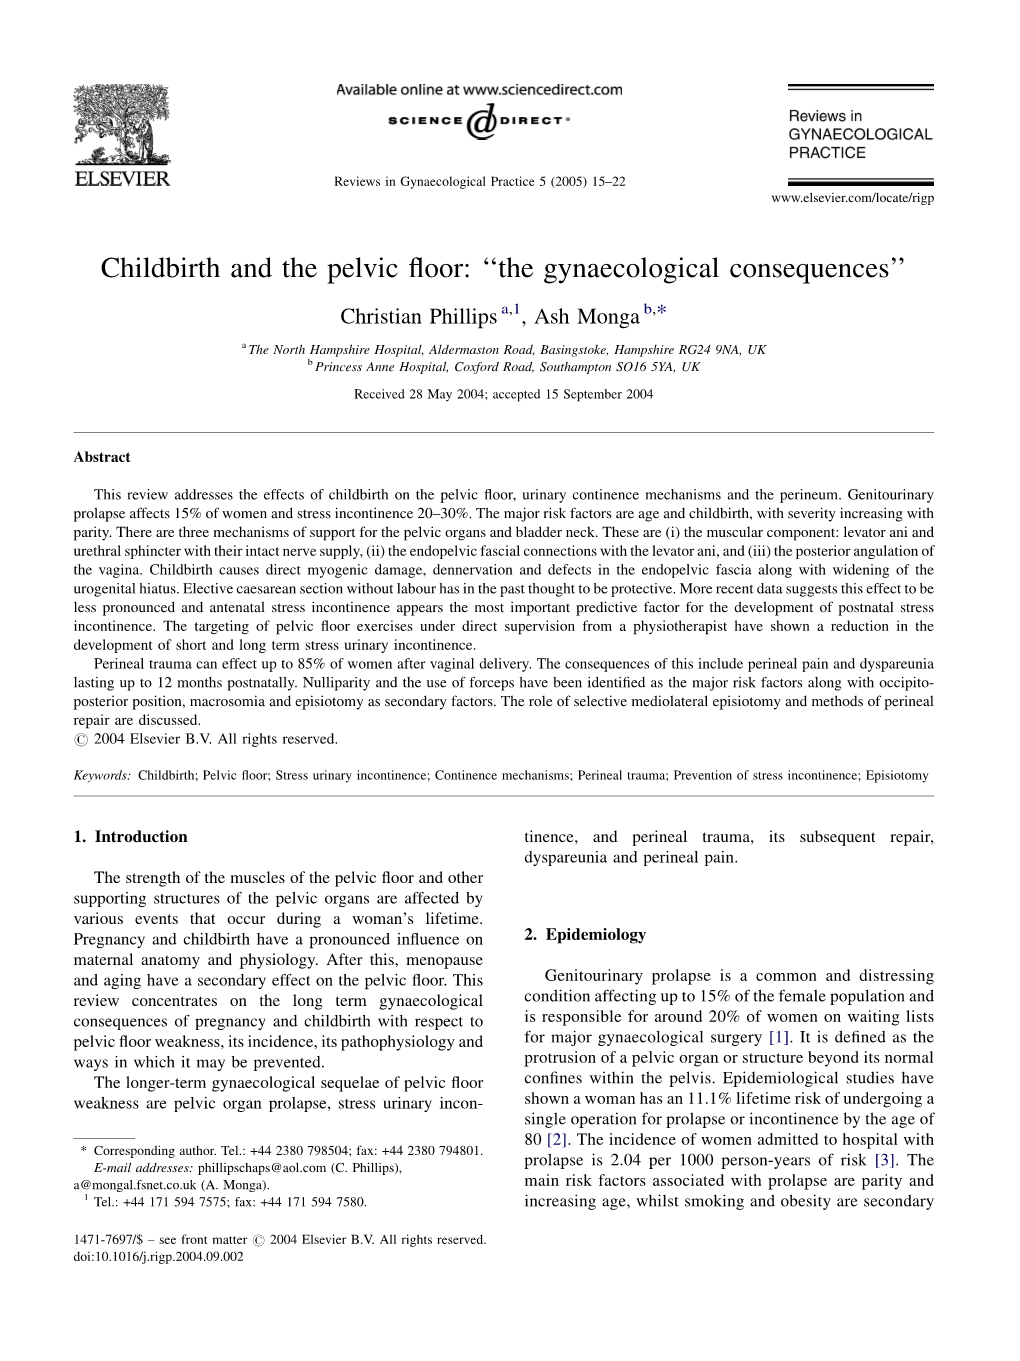 Childbirth and the Pelvic Floor: ''The Gynaecological Consequences''